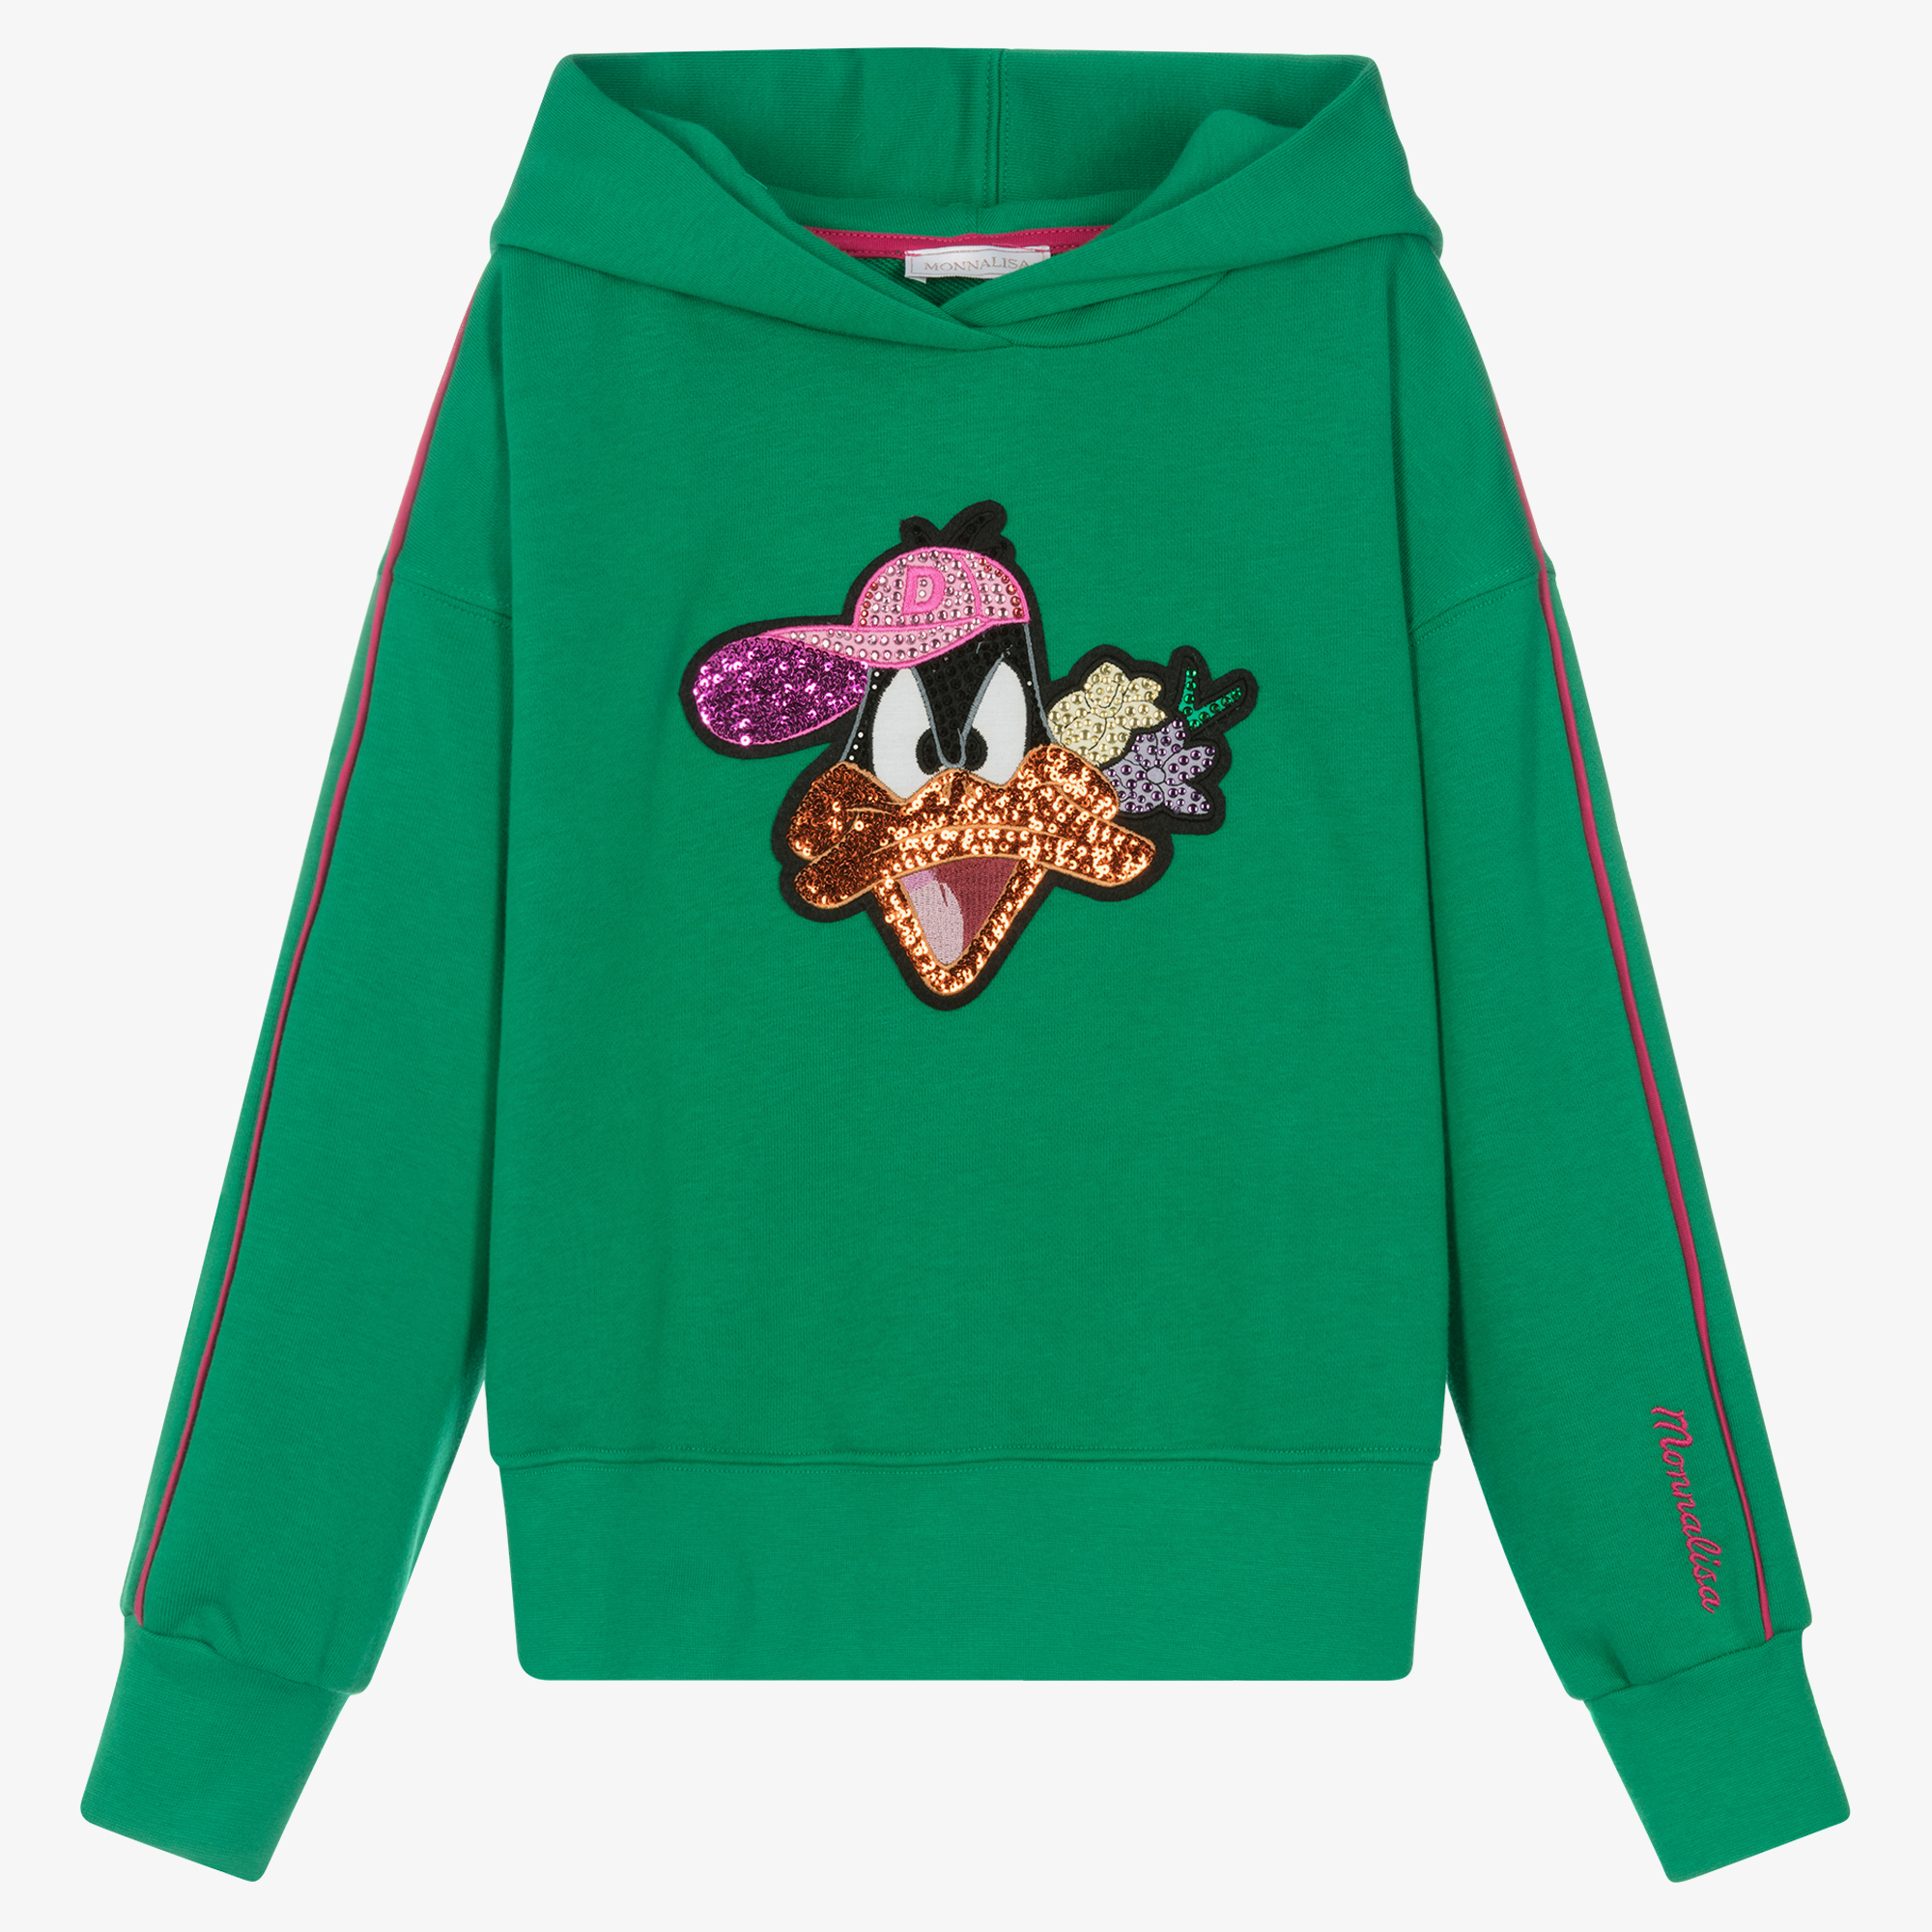 Official Minnie Mouse Gucci shirt, hoodie, sweater and long sleeve